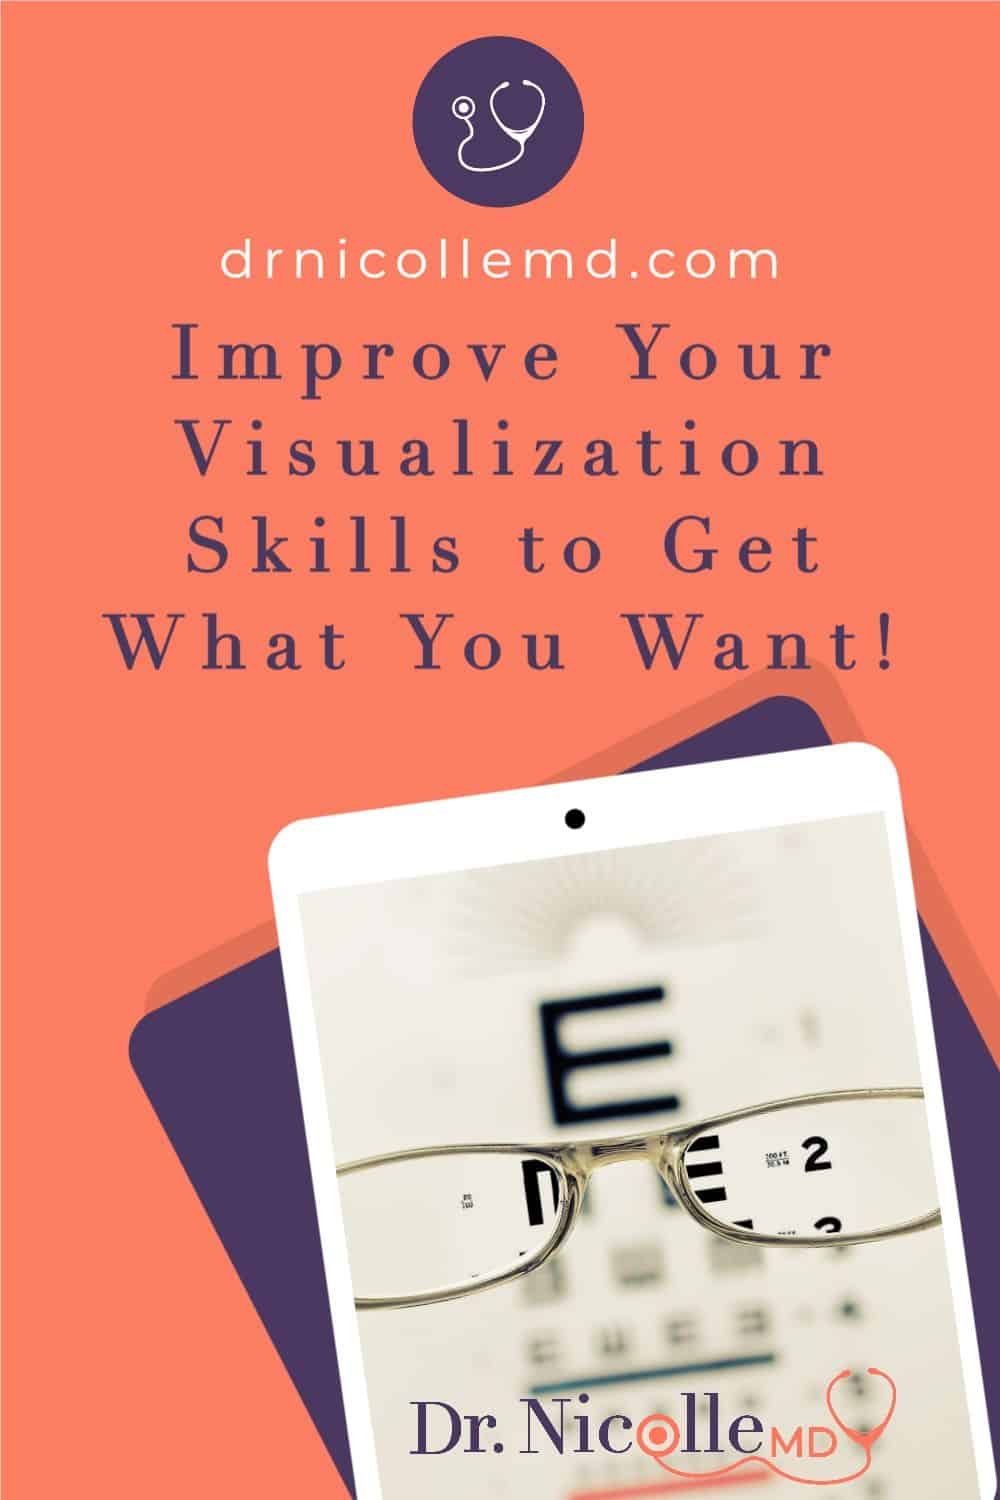 How to Improve Your Visualization Skills